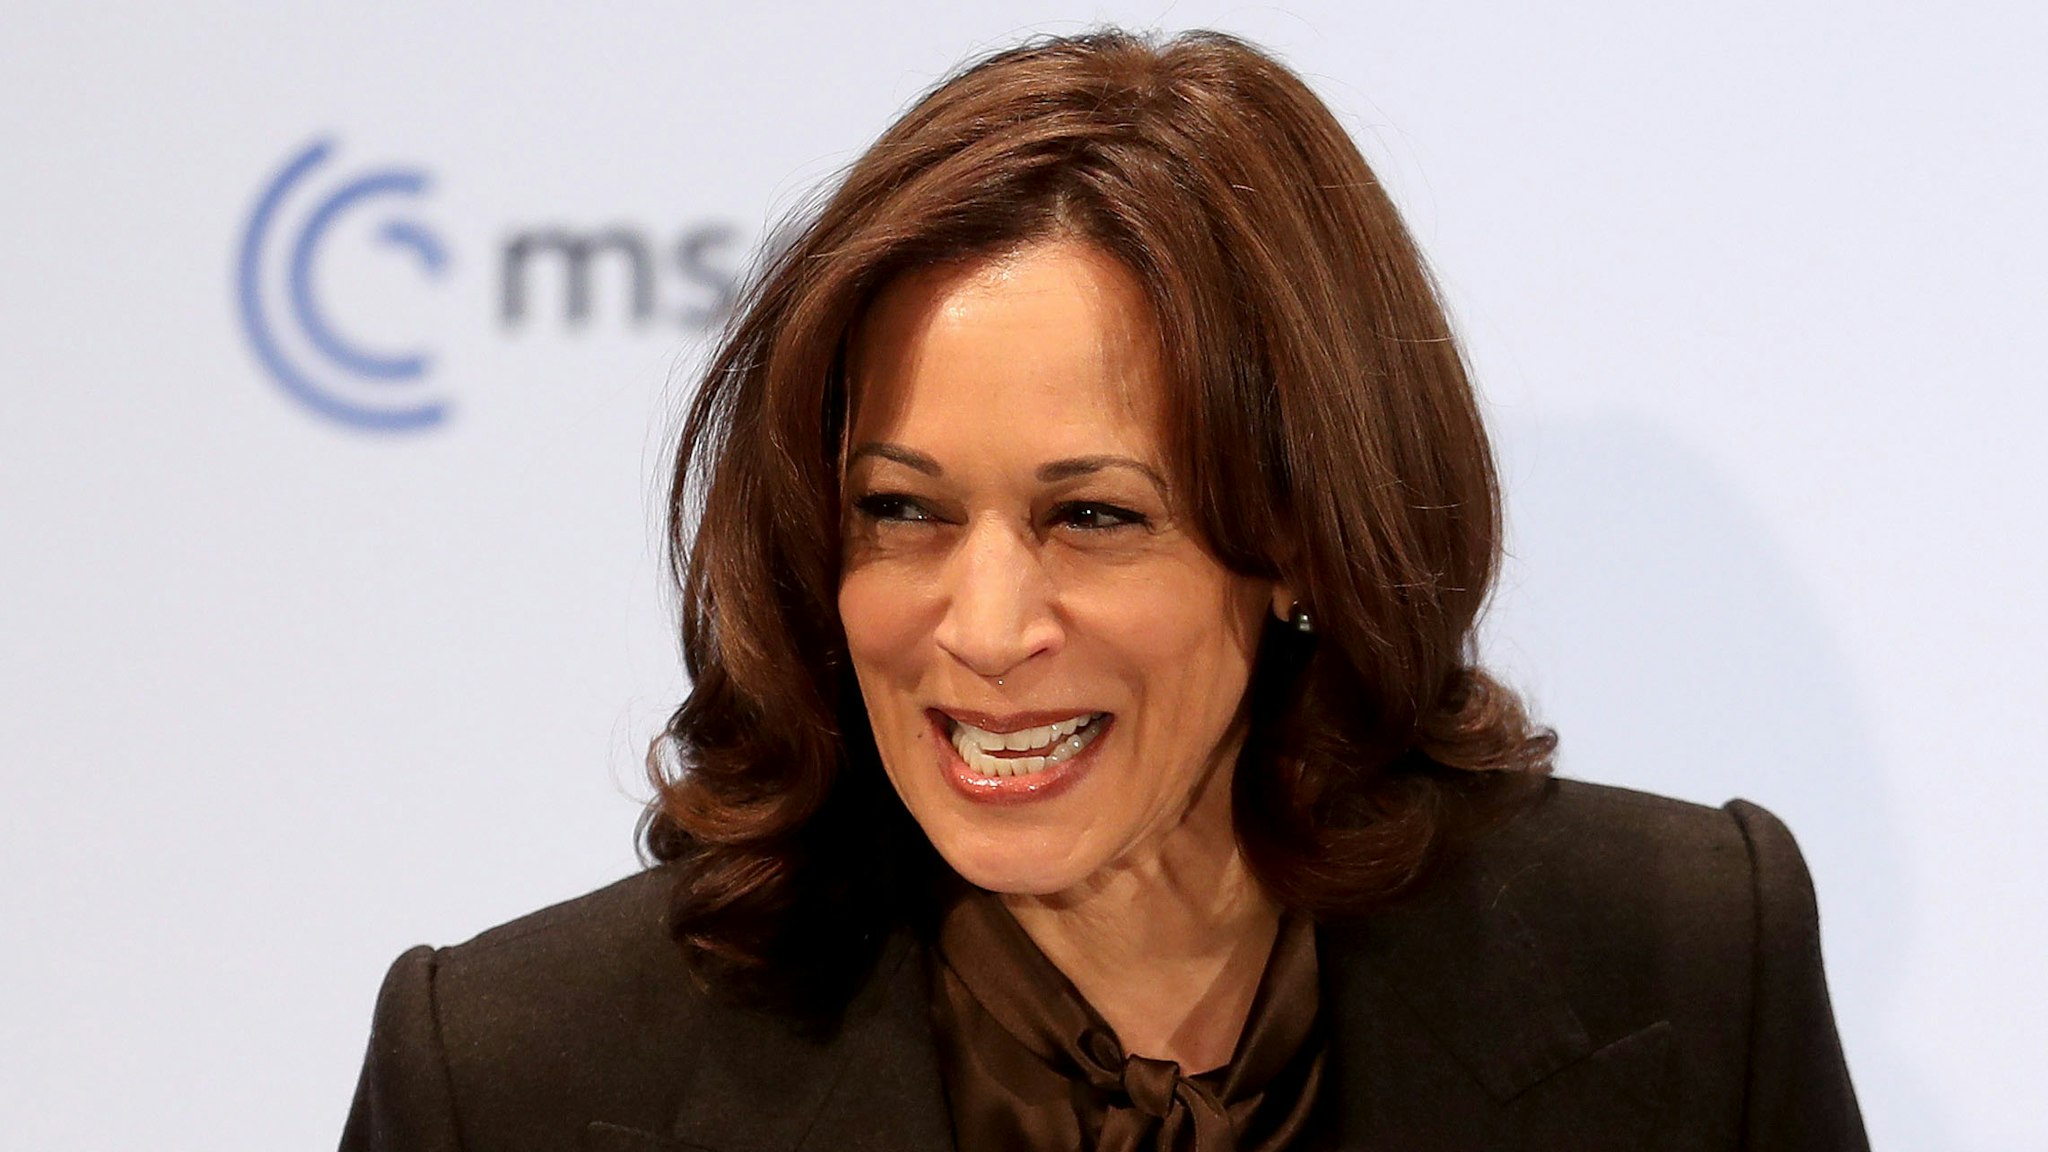 MUNICH, GERMANY - FEBRUARY 19: U.S. vice president Kamala Harris smiles during her speech at the 2022 Munich Security Conference on February 19, 2022 in Munich, Germany. The conference, which brings together security experts, politicians and people of influence from across the globe, is taking place as Russian troops stand amassed on the Russian, Belarusian and Crimean borders to Ukraine, causing international fears of an imminent military invasion.